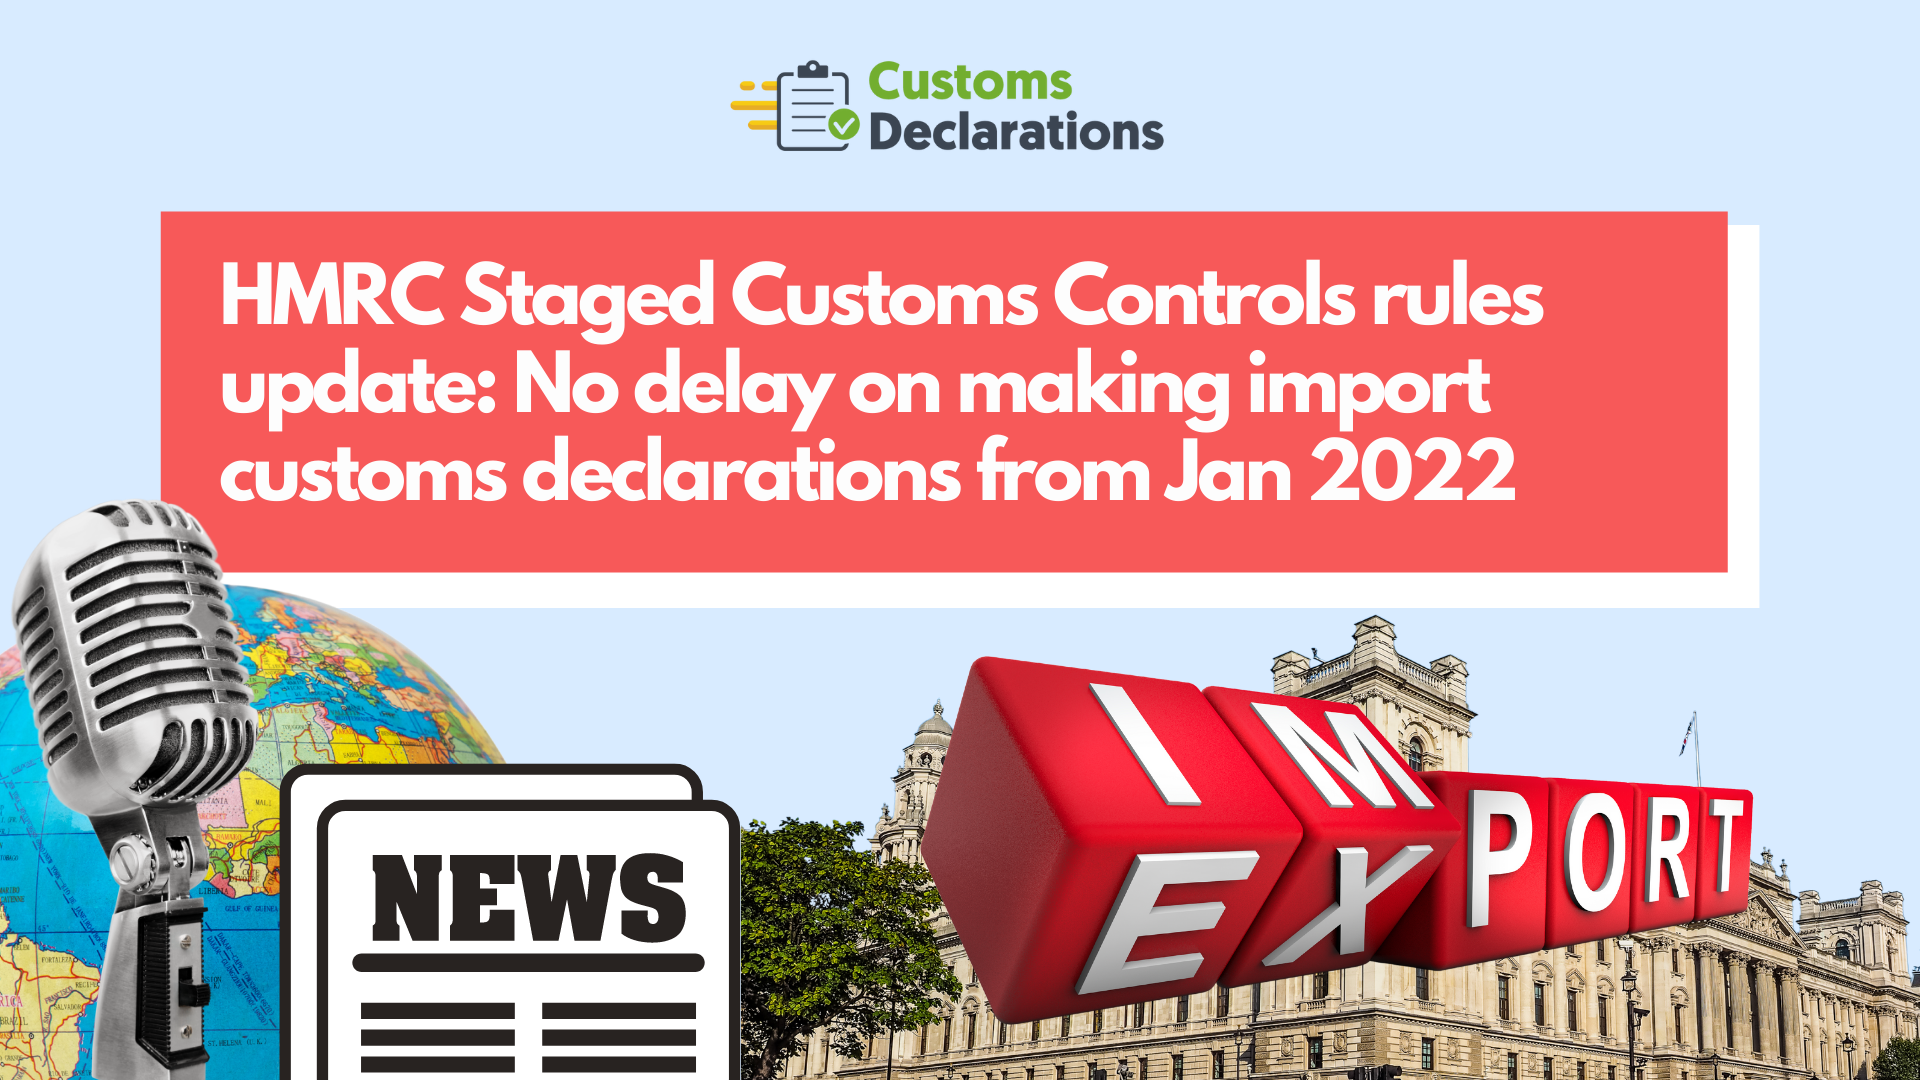 HMRC Staged Customs Controls rules update: No delay on making import customs declarations from Jan 2022